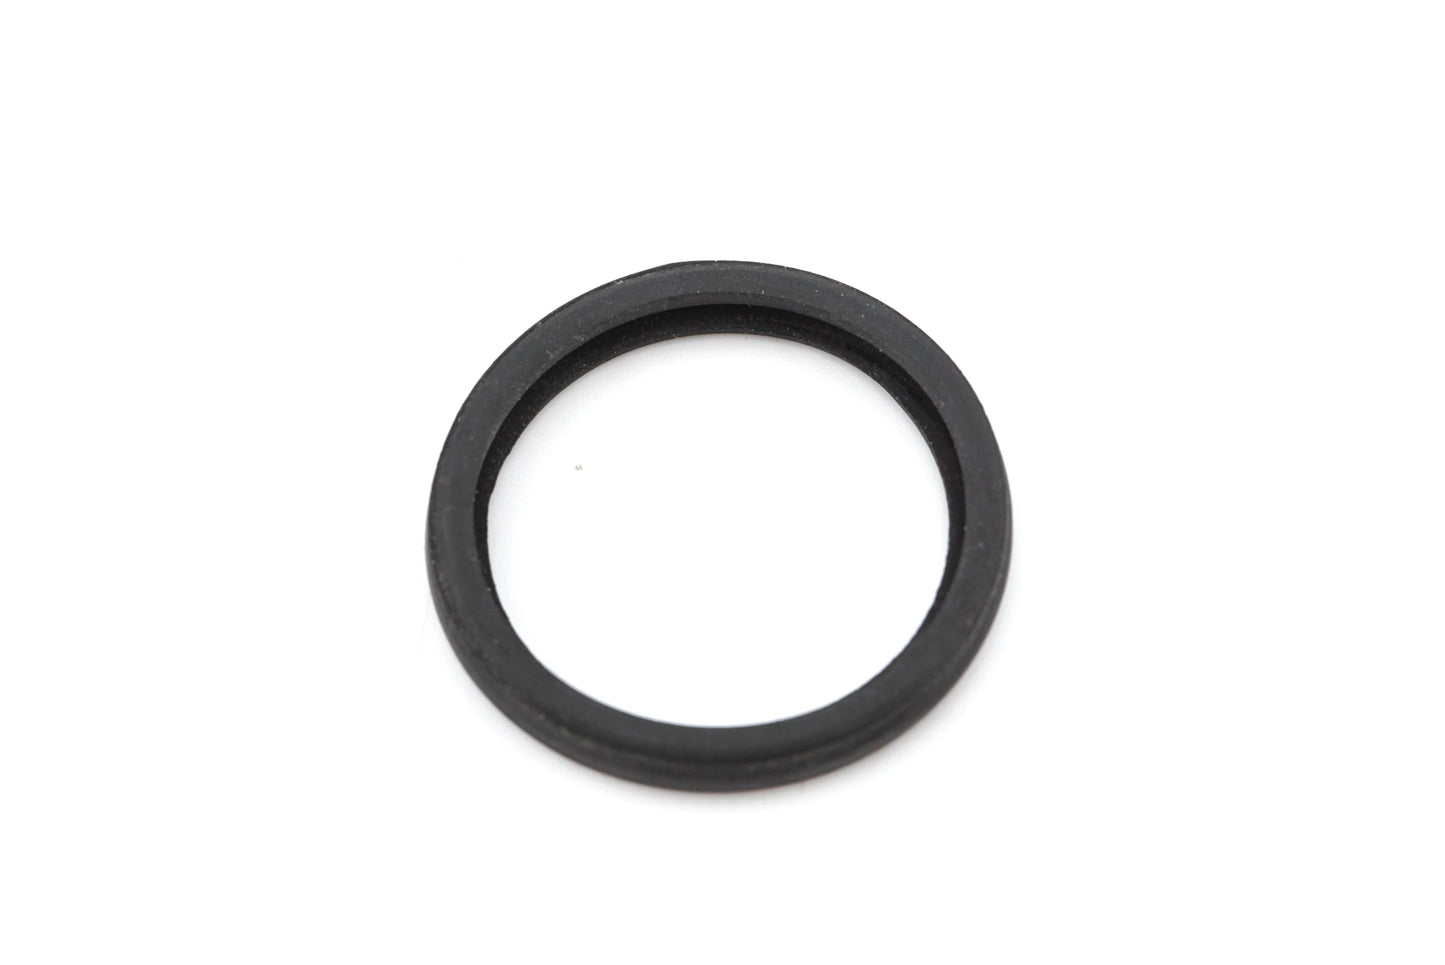 Canon Rubber Eyepiece Ring - Accessory